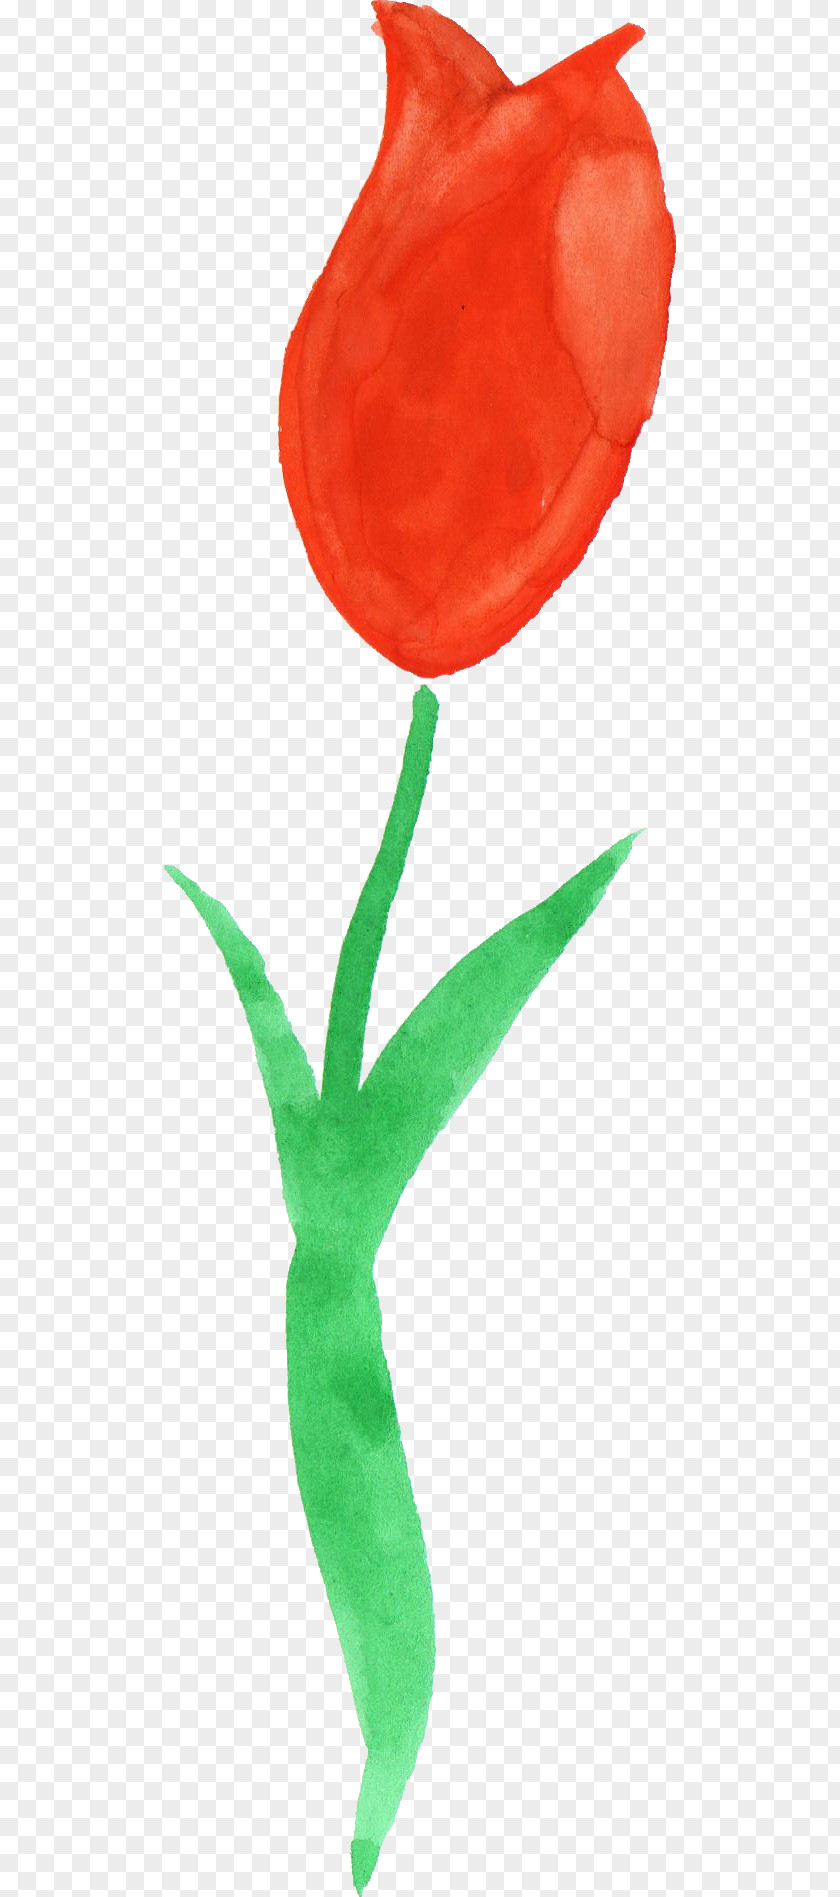 Tulips Tulip Watercolor Painting Clip Art PNG